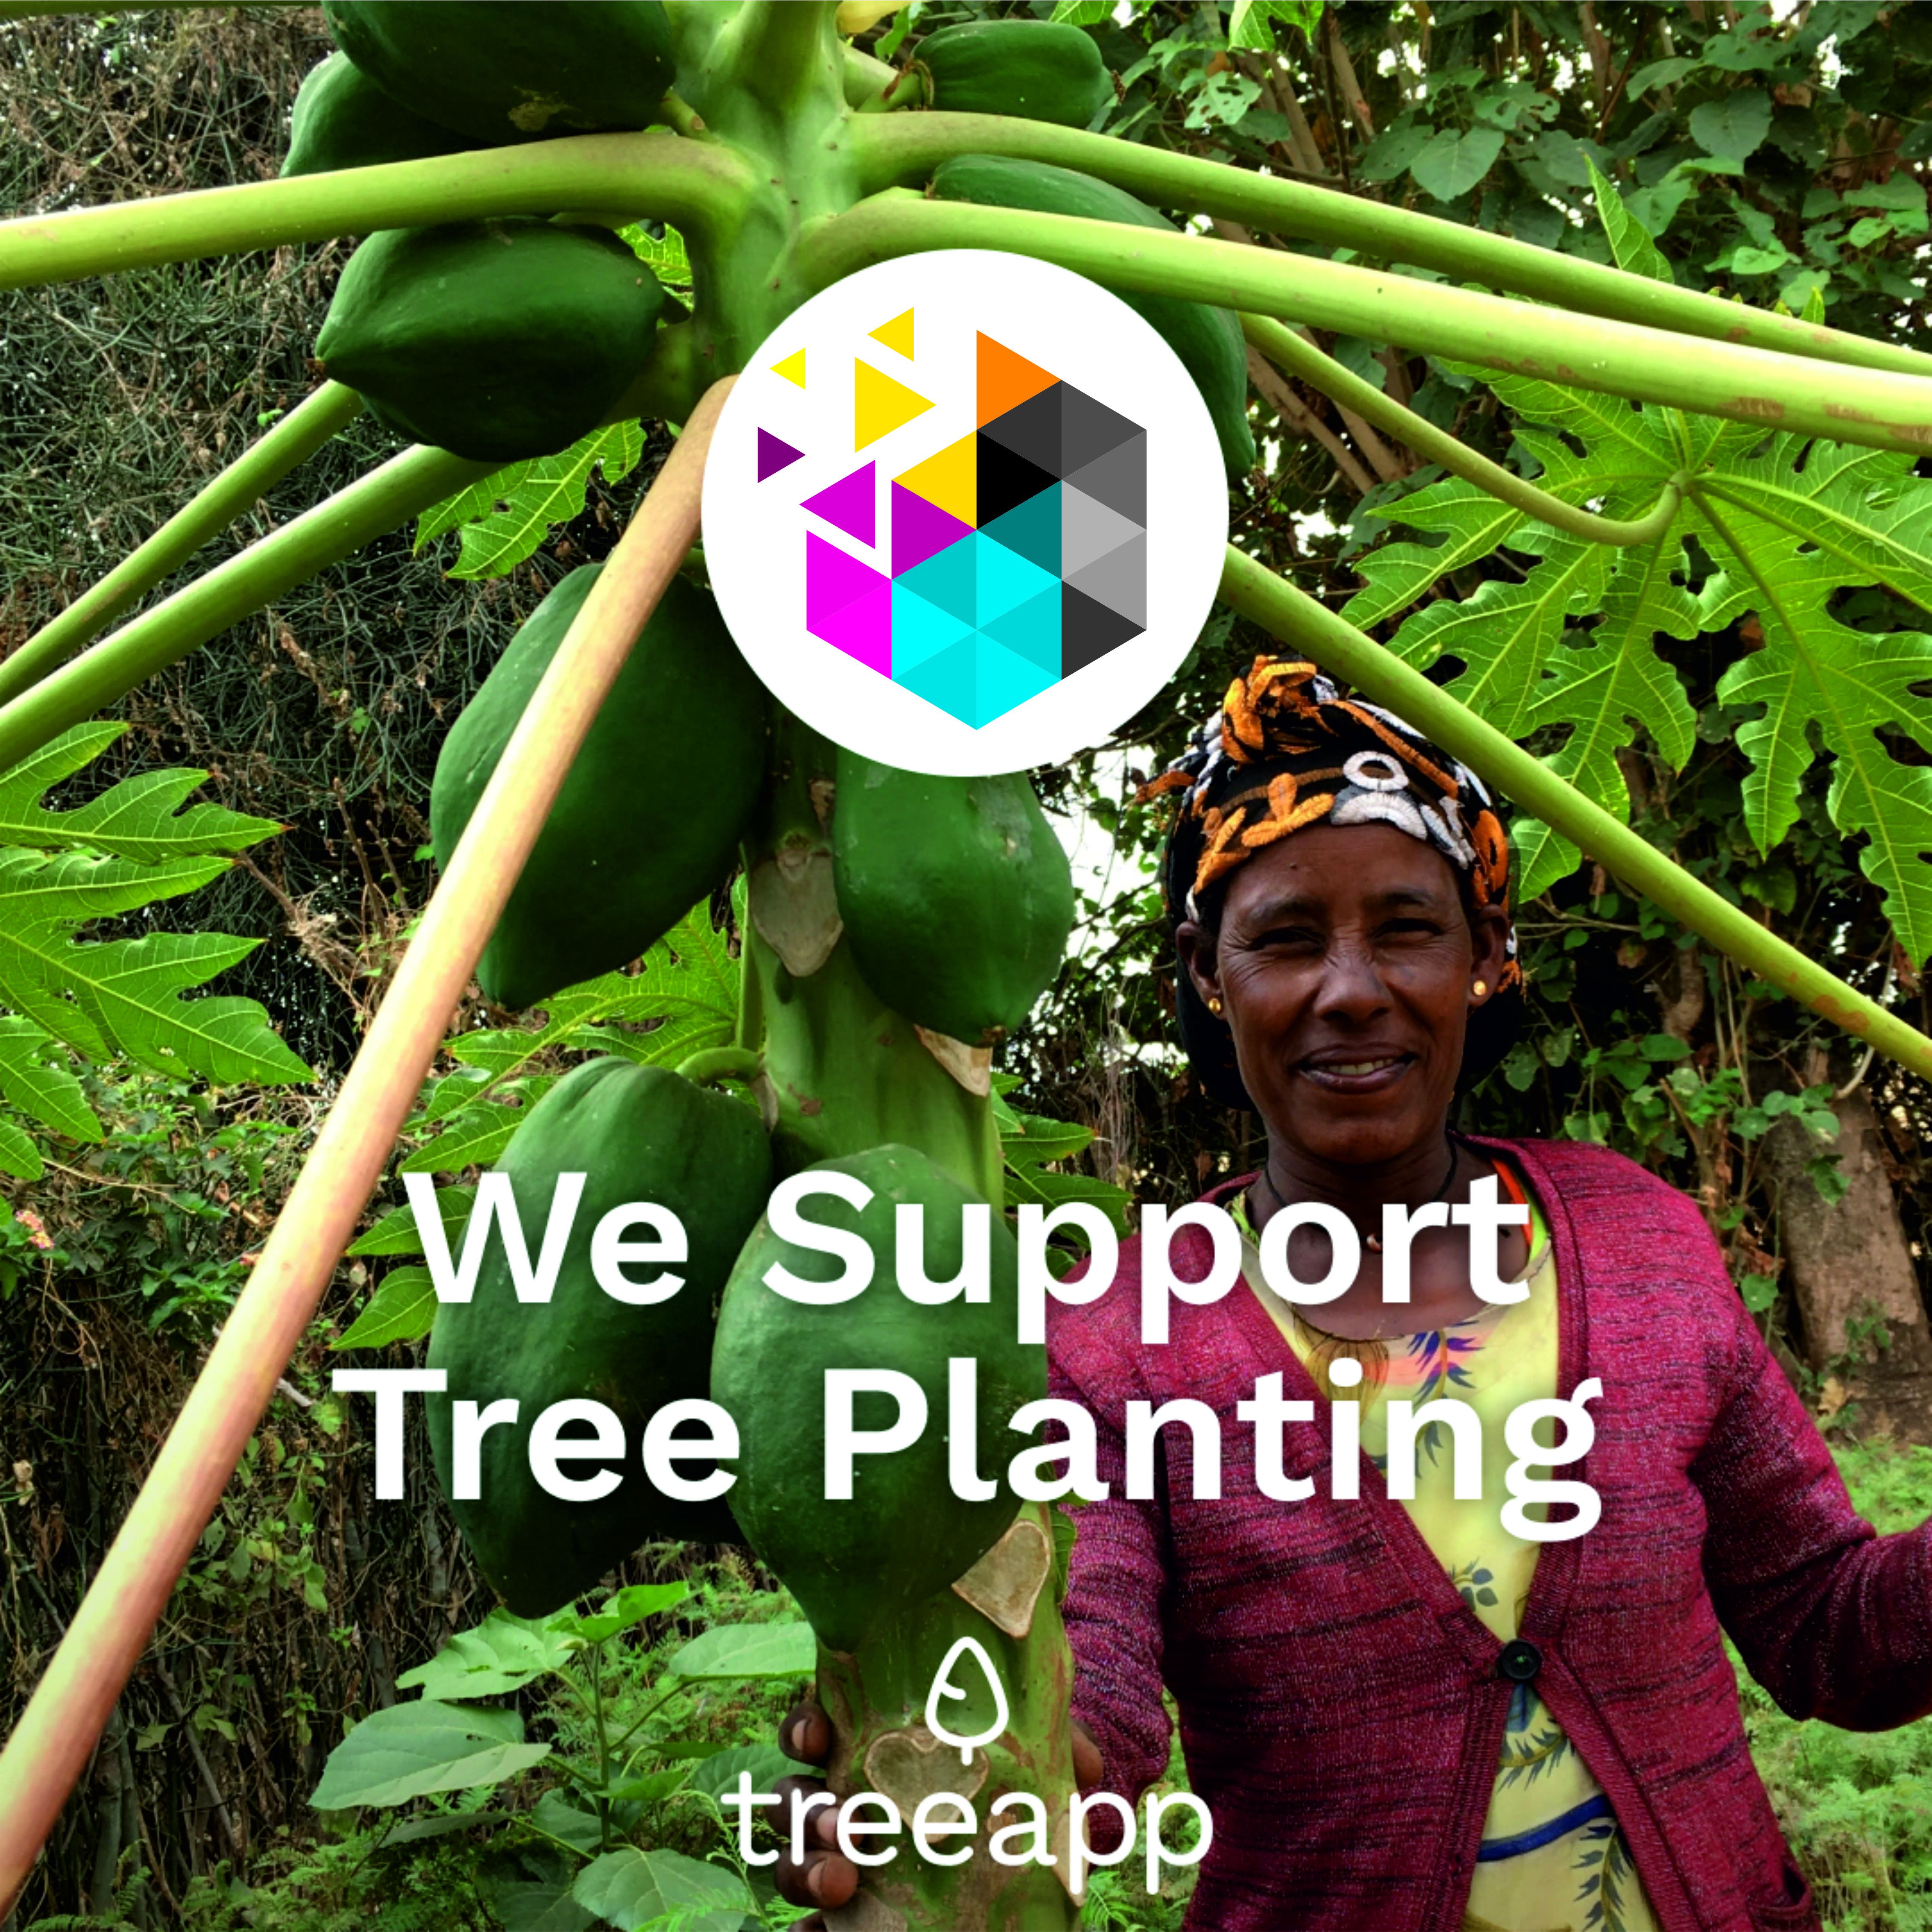 Carrick Signs supports tree planting via treeapp